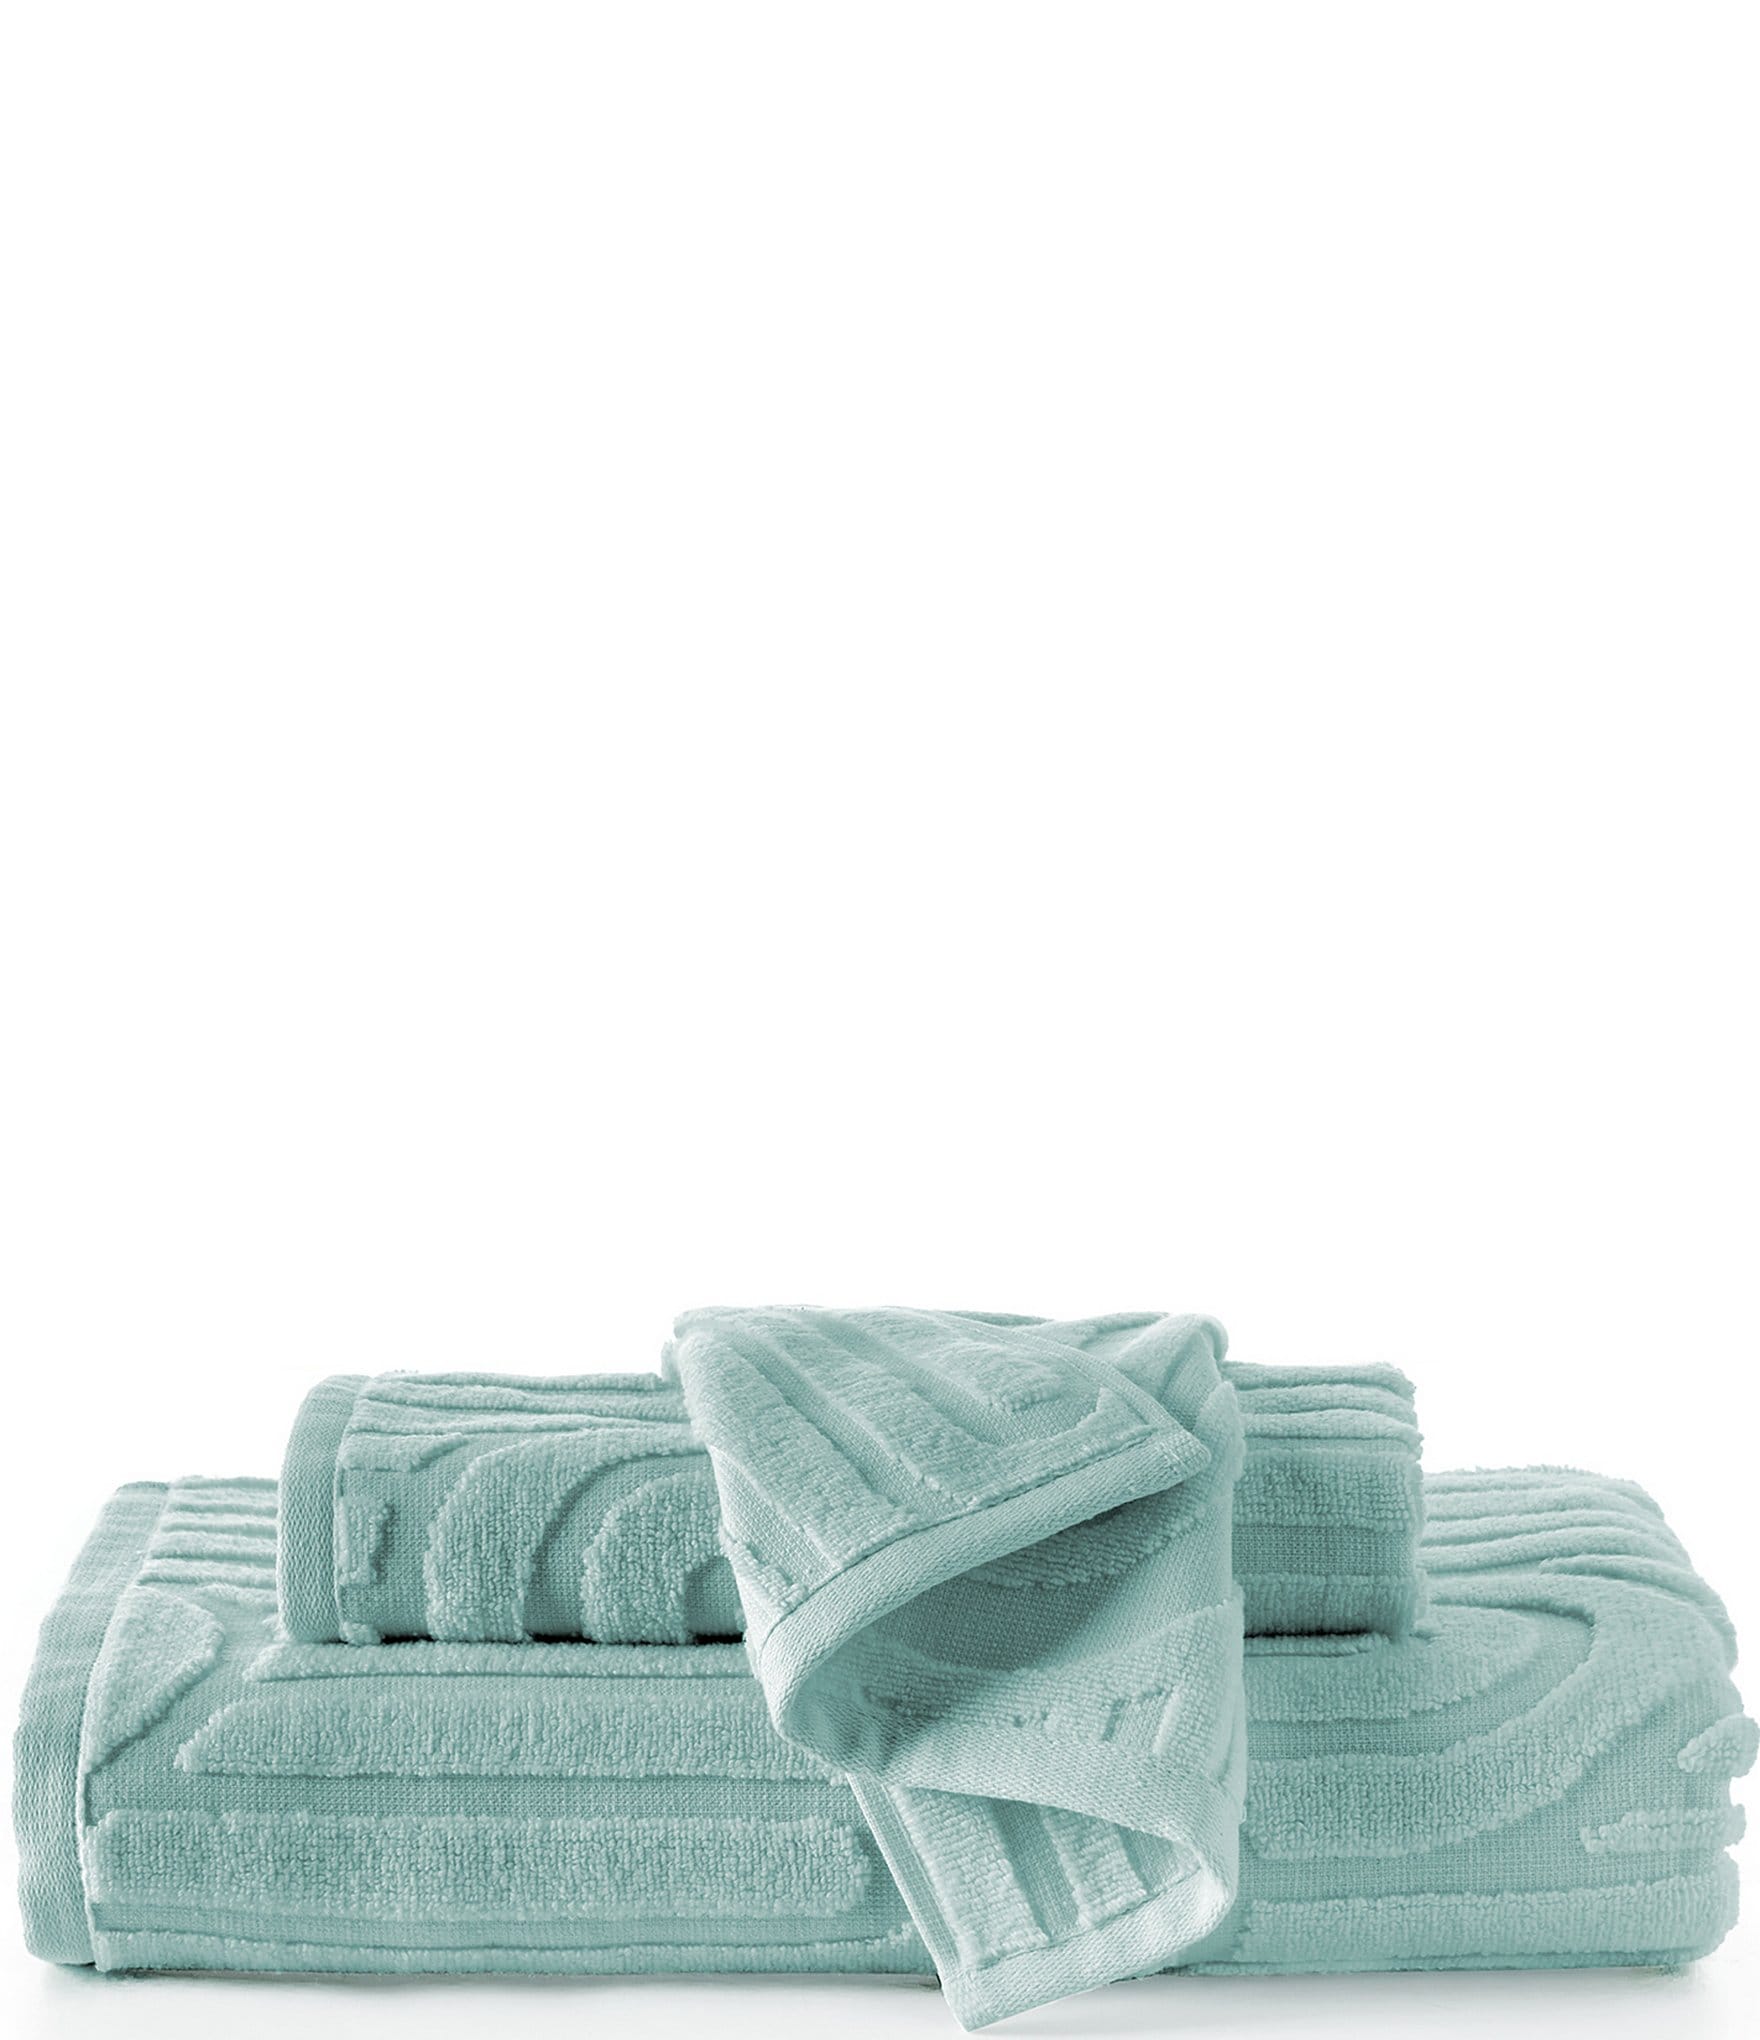 Sustainable Bamboo Bath Towels, Set of 4 - Light Gray - Made in